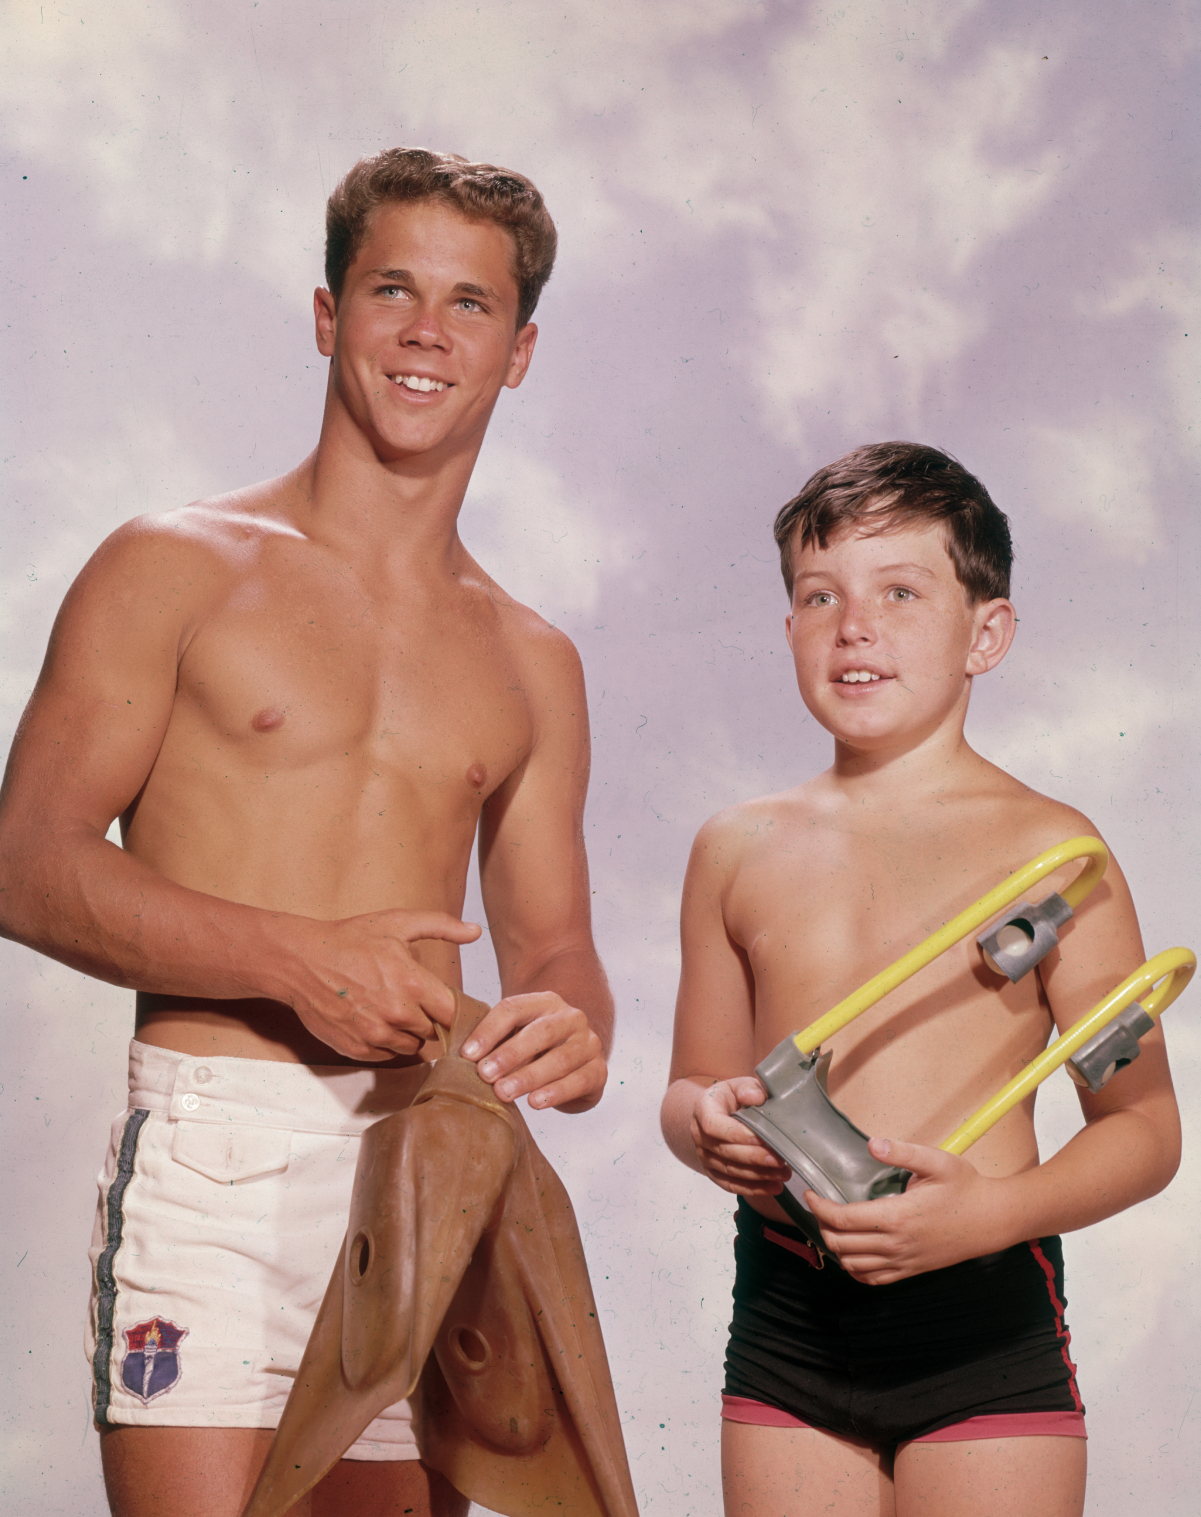 Tony Dow as Wally Cleaver and Jerry Mathers as Beaver Cleaver dressed in swimming trunks on 'Leave It to Beaver,' 1955